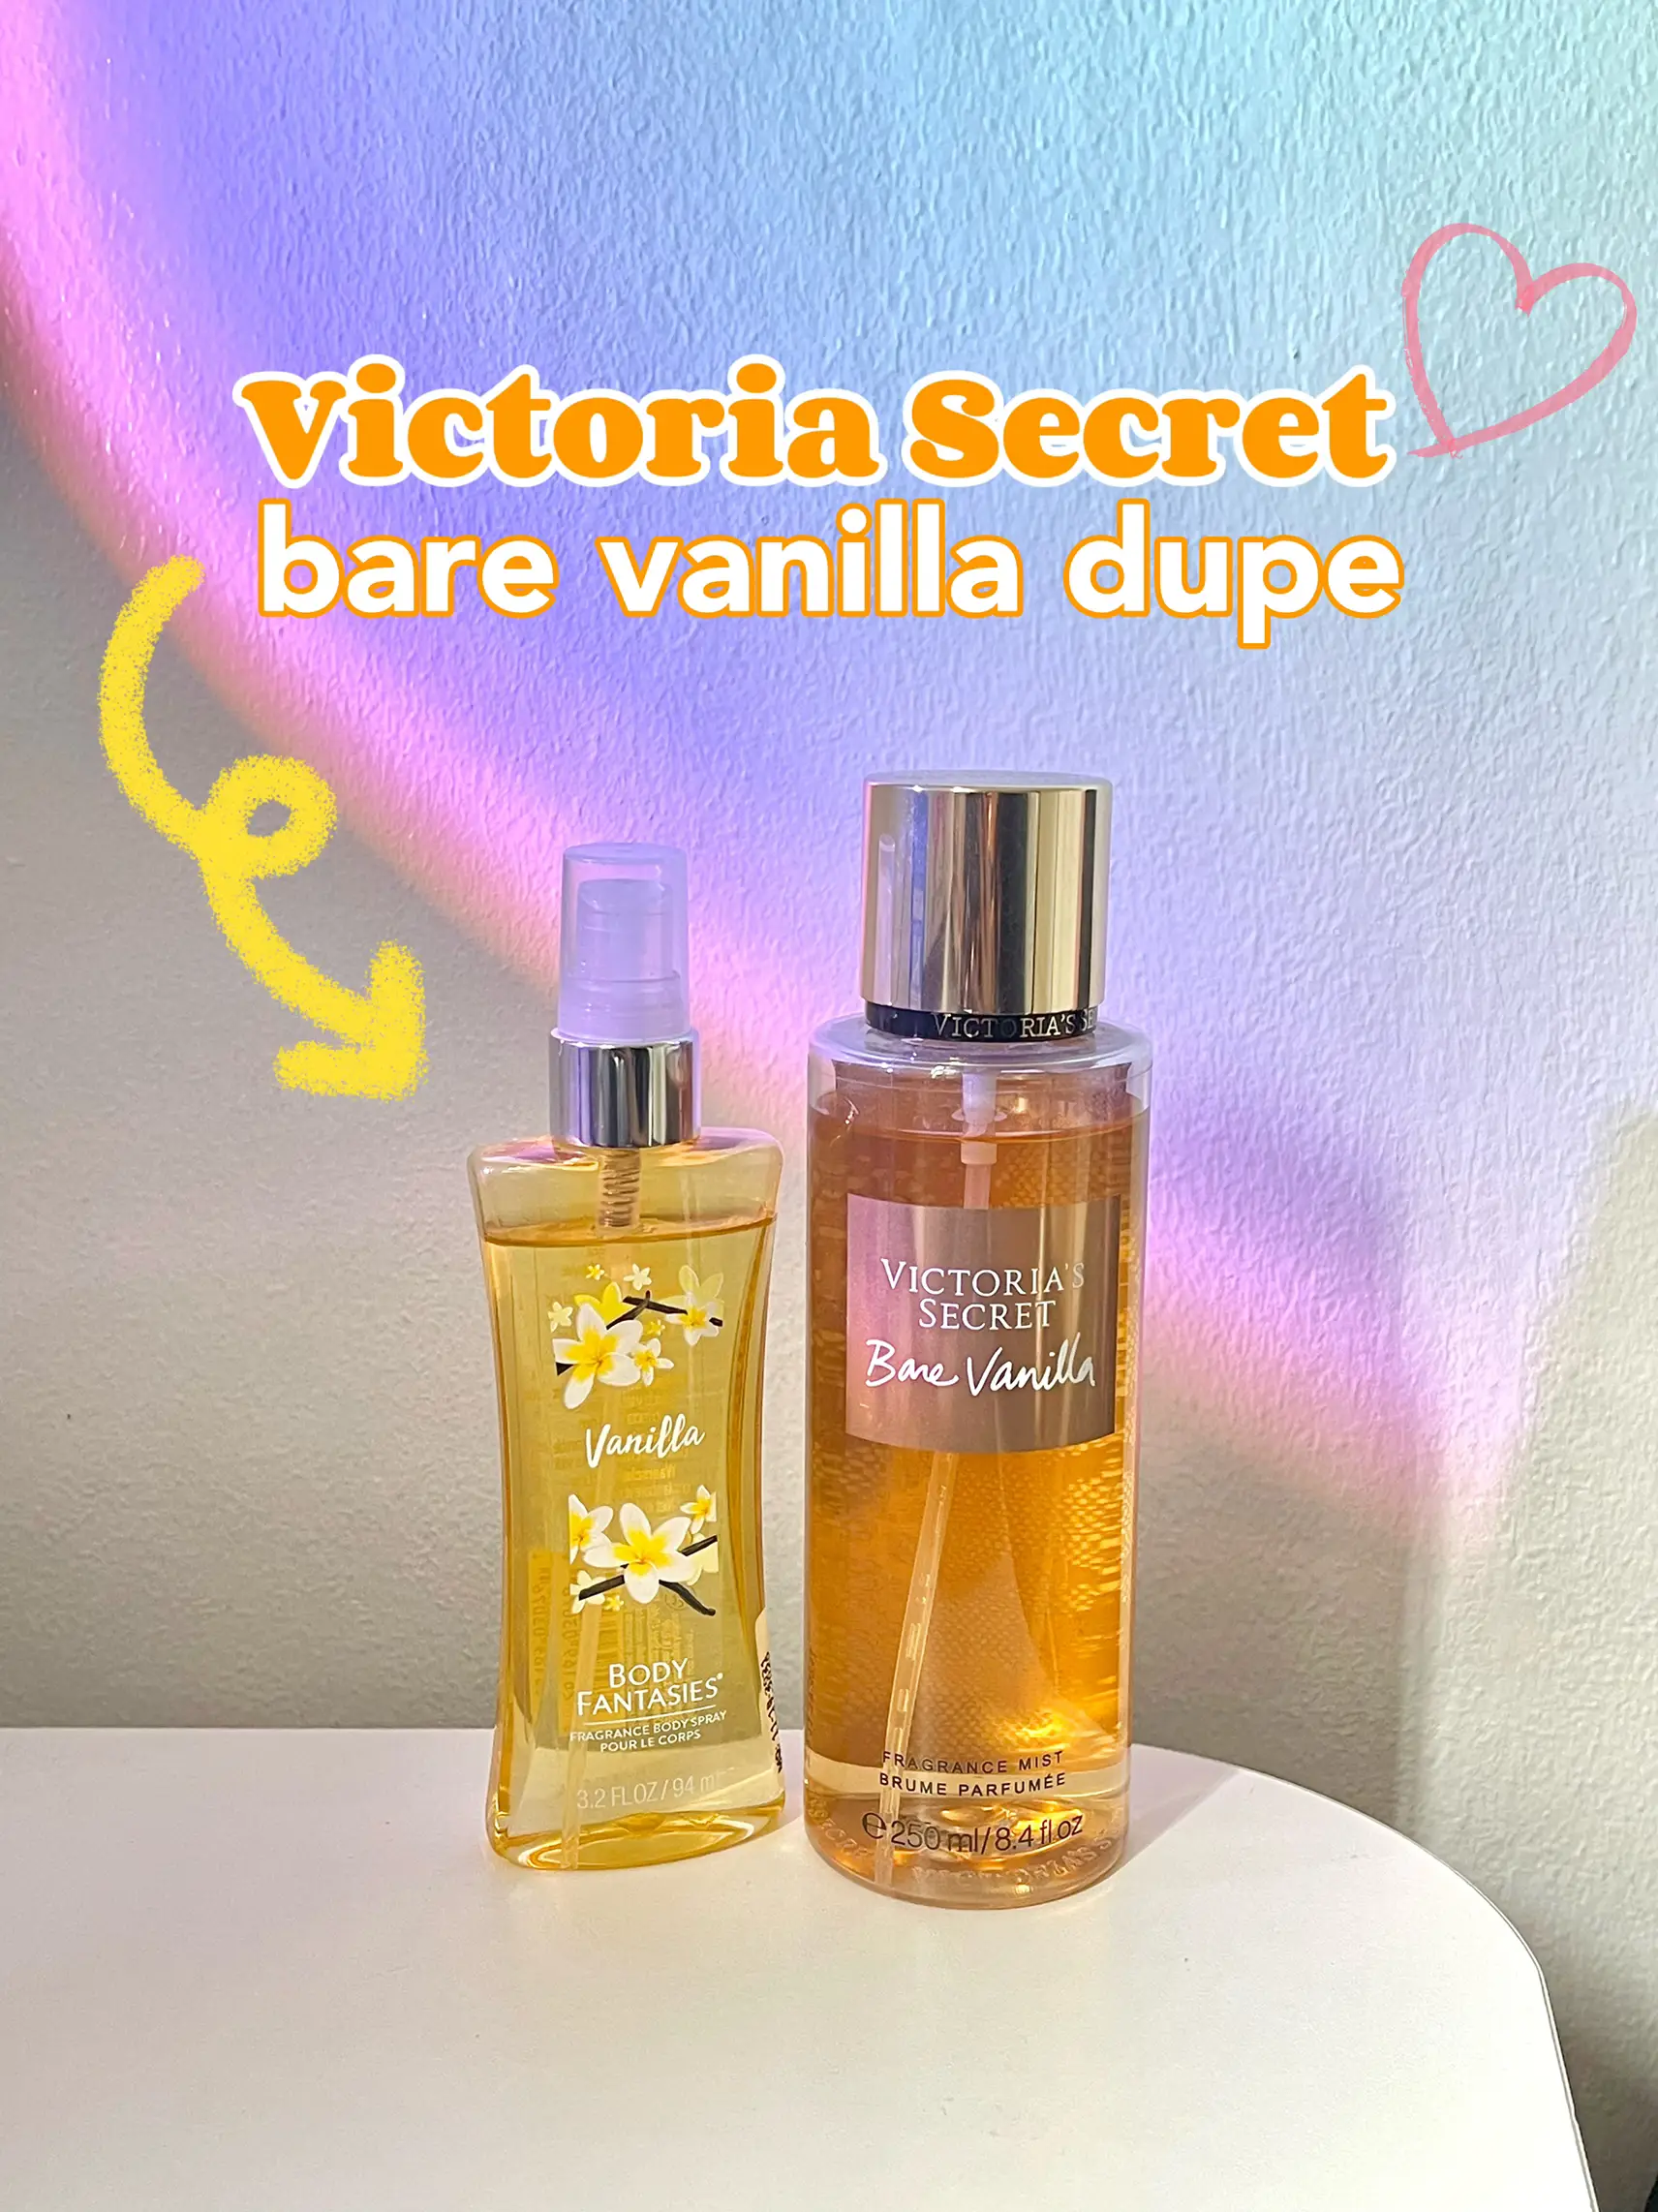 Victoria's Secret Bare Vanilla dupe ✨, Gallery posted by jazmine_espos